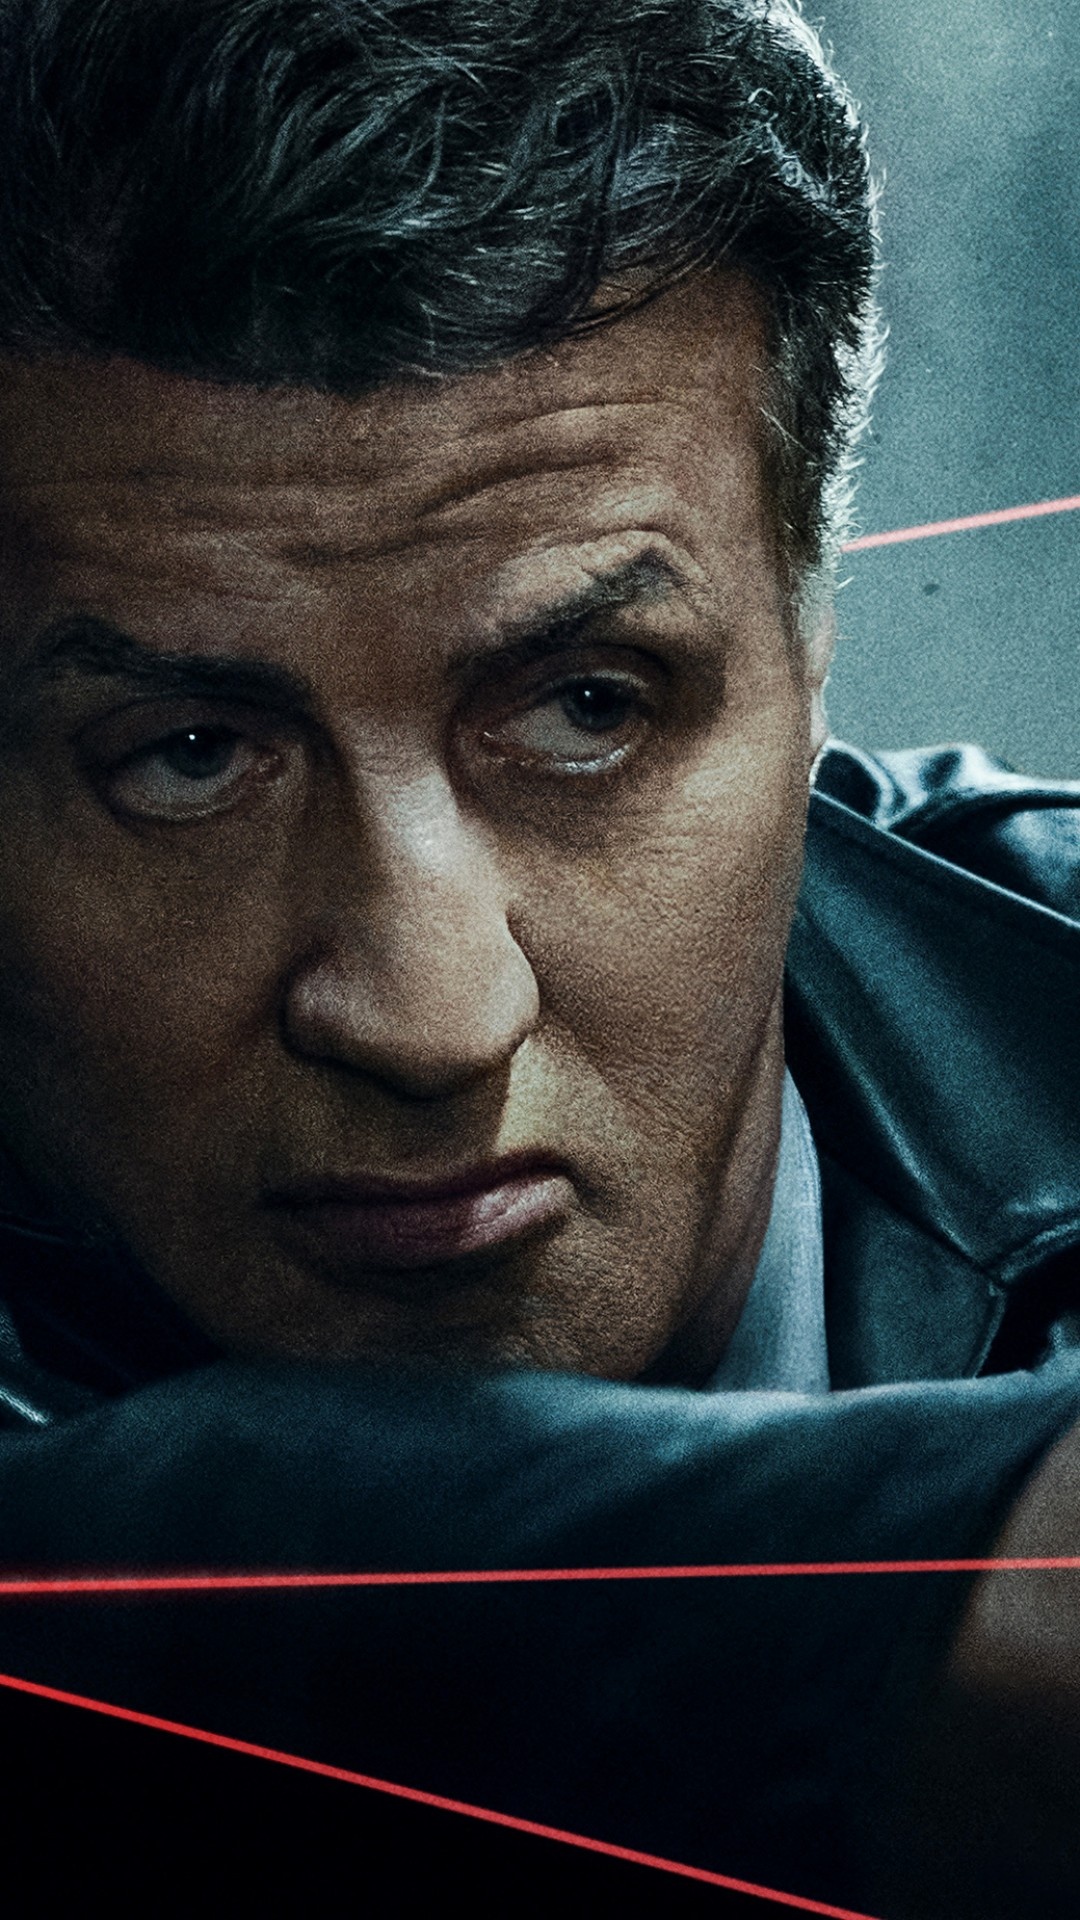 HD wallpaper, Movie Actor, Escape Plan 2, 1080X1920 Full Hd Phone, 4K Movies, Iphone Full Hd Sylvester Stallone Wallpaper Photo, Sylvester Stallone